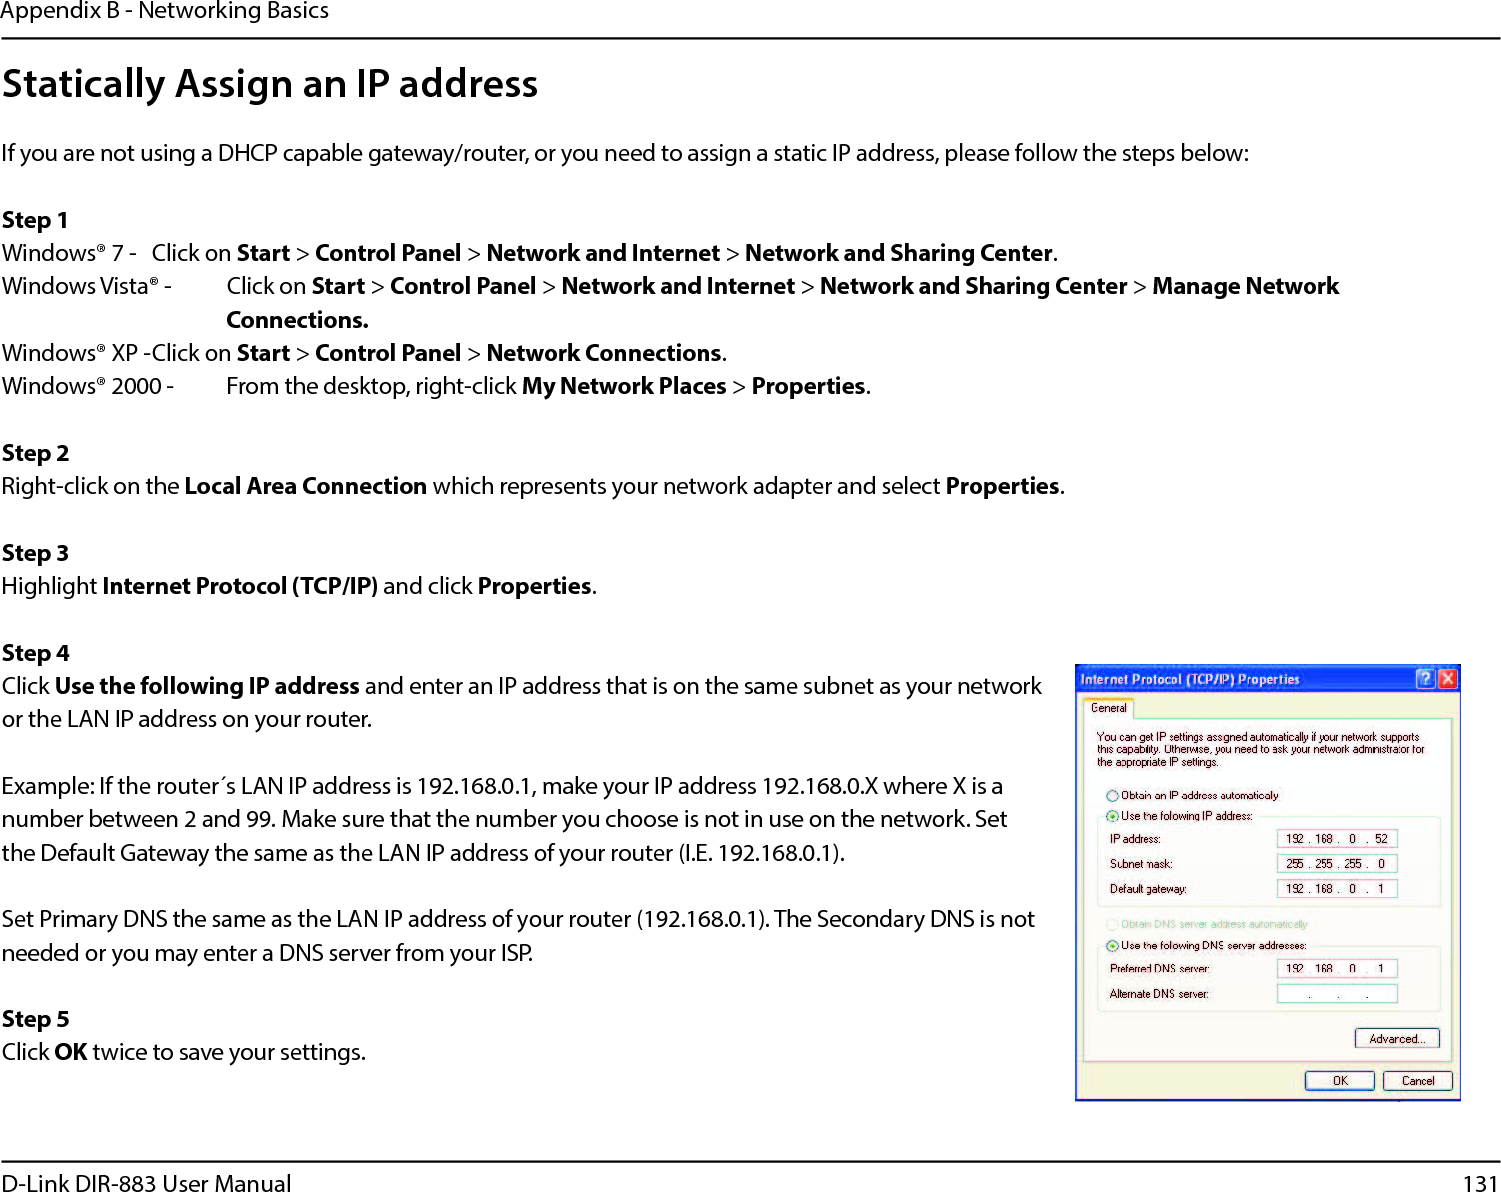 131D-Link DIR-883 User ManualAppendix B - Networking BasicsStatically Assign an IP addressIf you are not using a DHCP capable gateway/router, or you need to assign a static IP address, please follow the steps below:Step 1Windows® 7 - Click on Start &gt; Control Panel &gt; Network and Internet &gt; Network and Sharing Center.Windows Vista® - Click on Start &gt; Control Panel &gt; Network and Internet &gt; Network and Sharing Center &gt; Manage Network      Connections.Windows® XP -Click on Start &gt; Control Panel &gt; Network Connections.Windows® 2000 - From the desktop, right-click My Network Places &gt; Properties.Step 2Right-click on the Local Area Connection which represents your network adapter and select Properties.Step 3Highlight Internet Protocol (TCP/IP) and click Properties.Step 4Click Use the following IP address and enter an IP address that is on the same subnet as your network or the LAN IP address on your router. Example: If the router´s LAN IP address is 192.168.0.1, make your IP address 192.168.0.X where X is a number between 2 and 99. Make sure that the number you choose is not in use on the network. Set the Default Gateway the same as the LAN IP address of your router (I.E. 192.168.0.1). Set Primary DNS the same as the LAN IP address of your router (192.168.0.1). The Secondary DNS is not needed or you may enter a DNS server from your ISP.Step 5Click OK twice to save your settings.